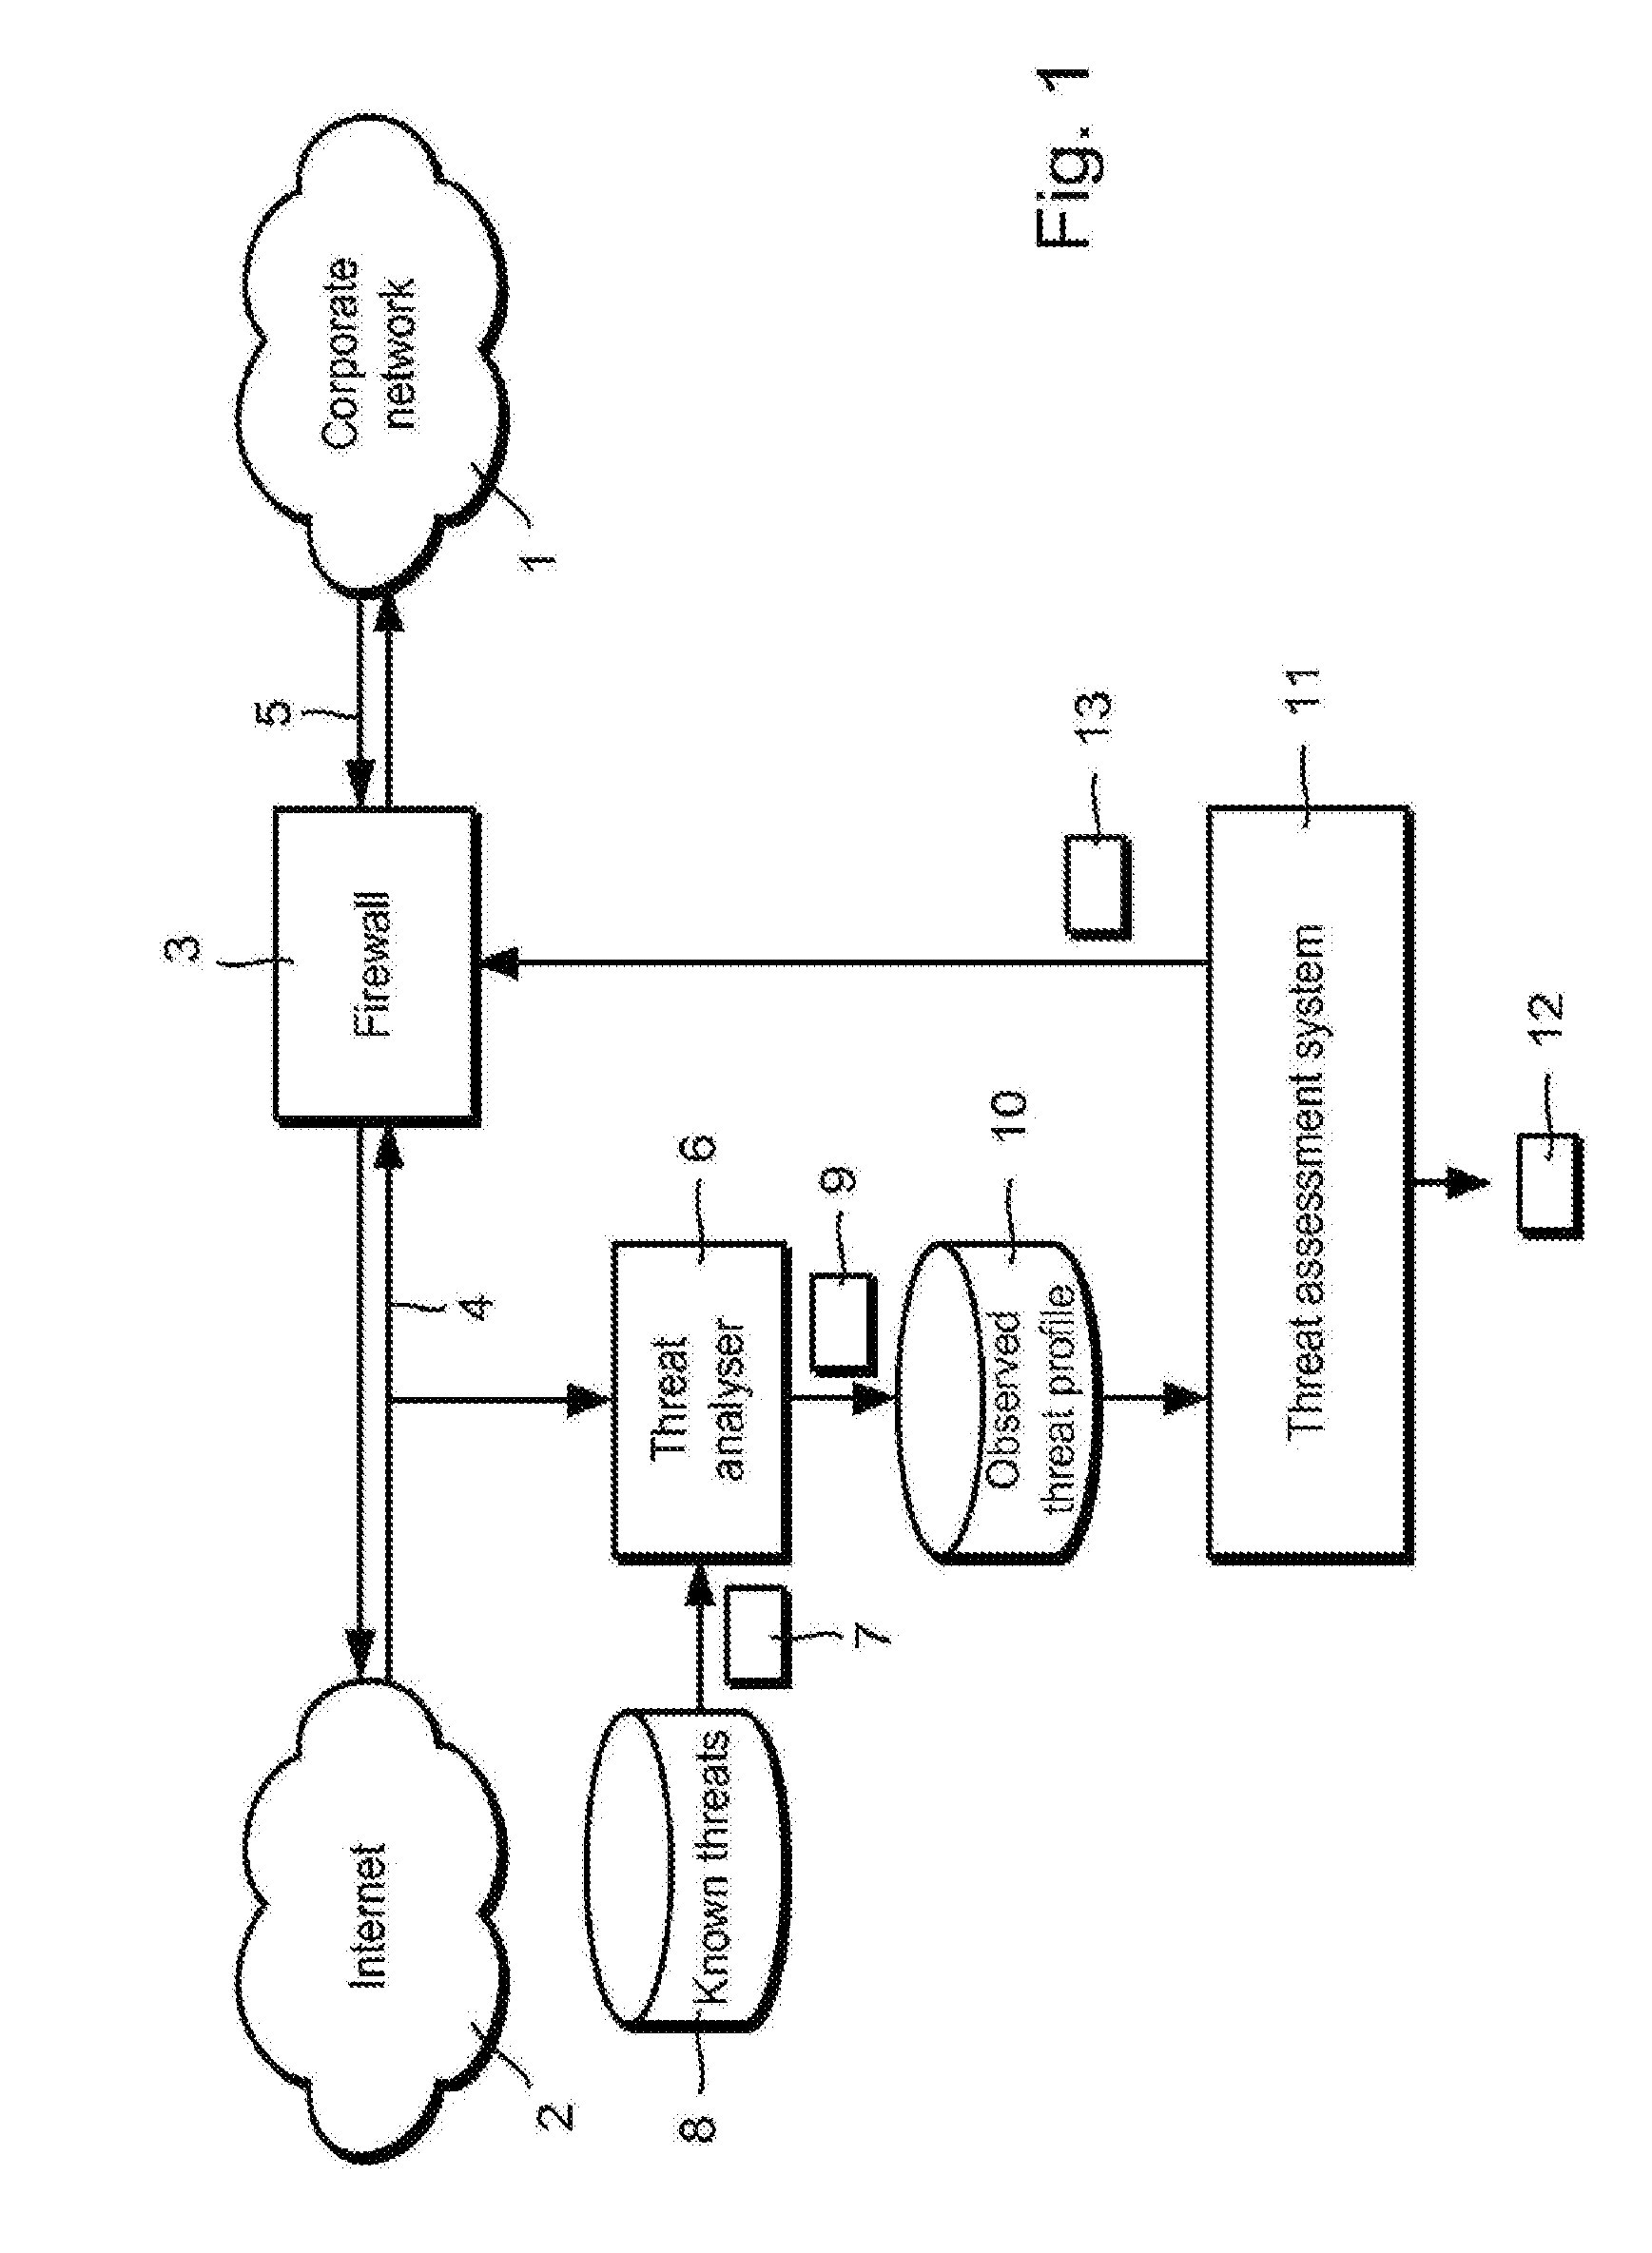 Apparatus and method for assessing financial loss from cyber threats capable of affecting at least one computer network